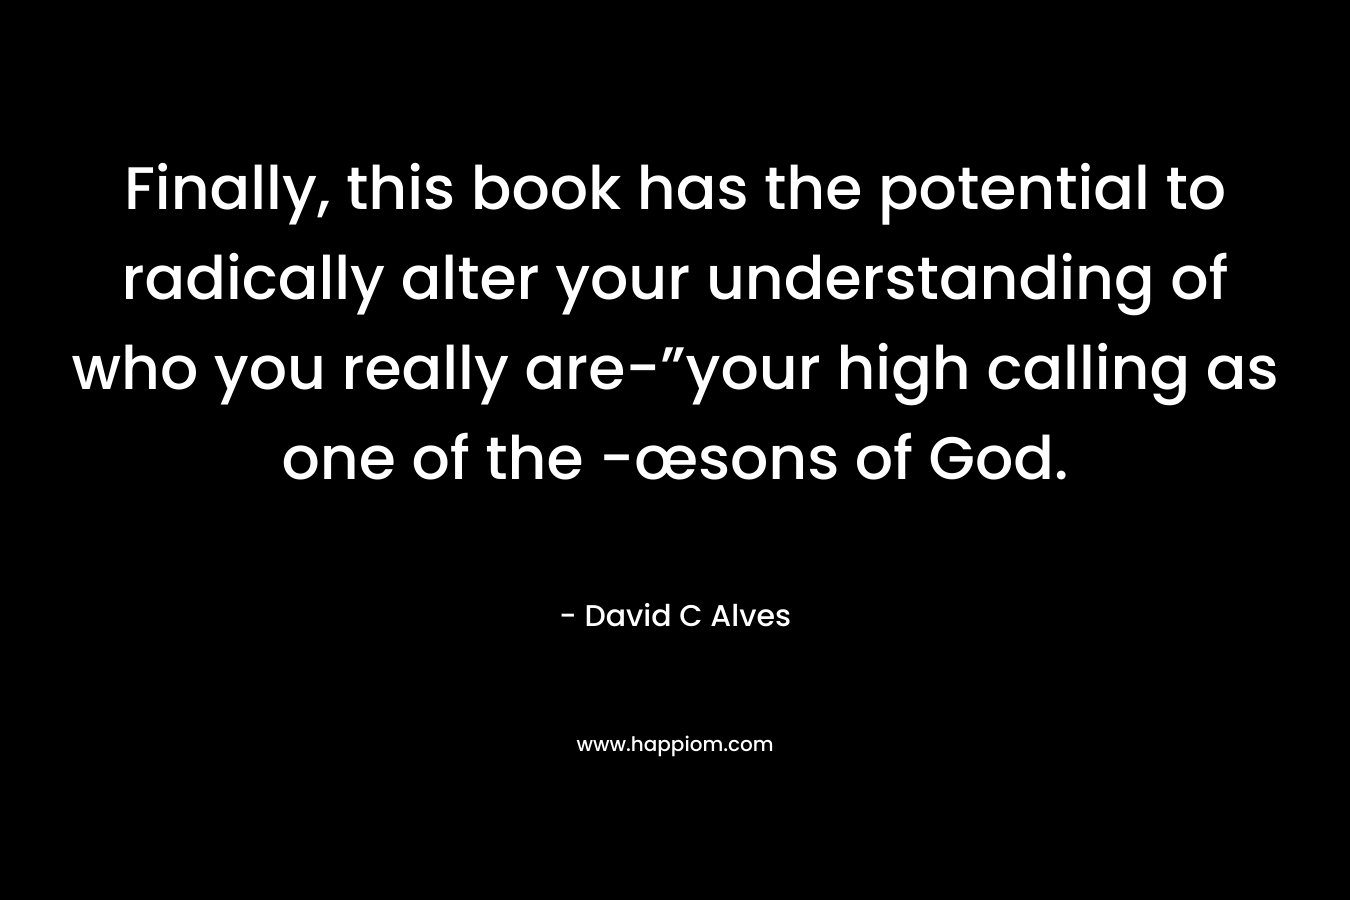 Finally, this book has the potential to radically alter your understanding of who you really are-”your high calling as one of the -œsons of God. – David C Alves